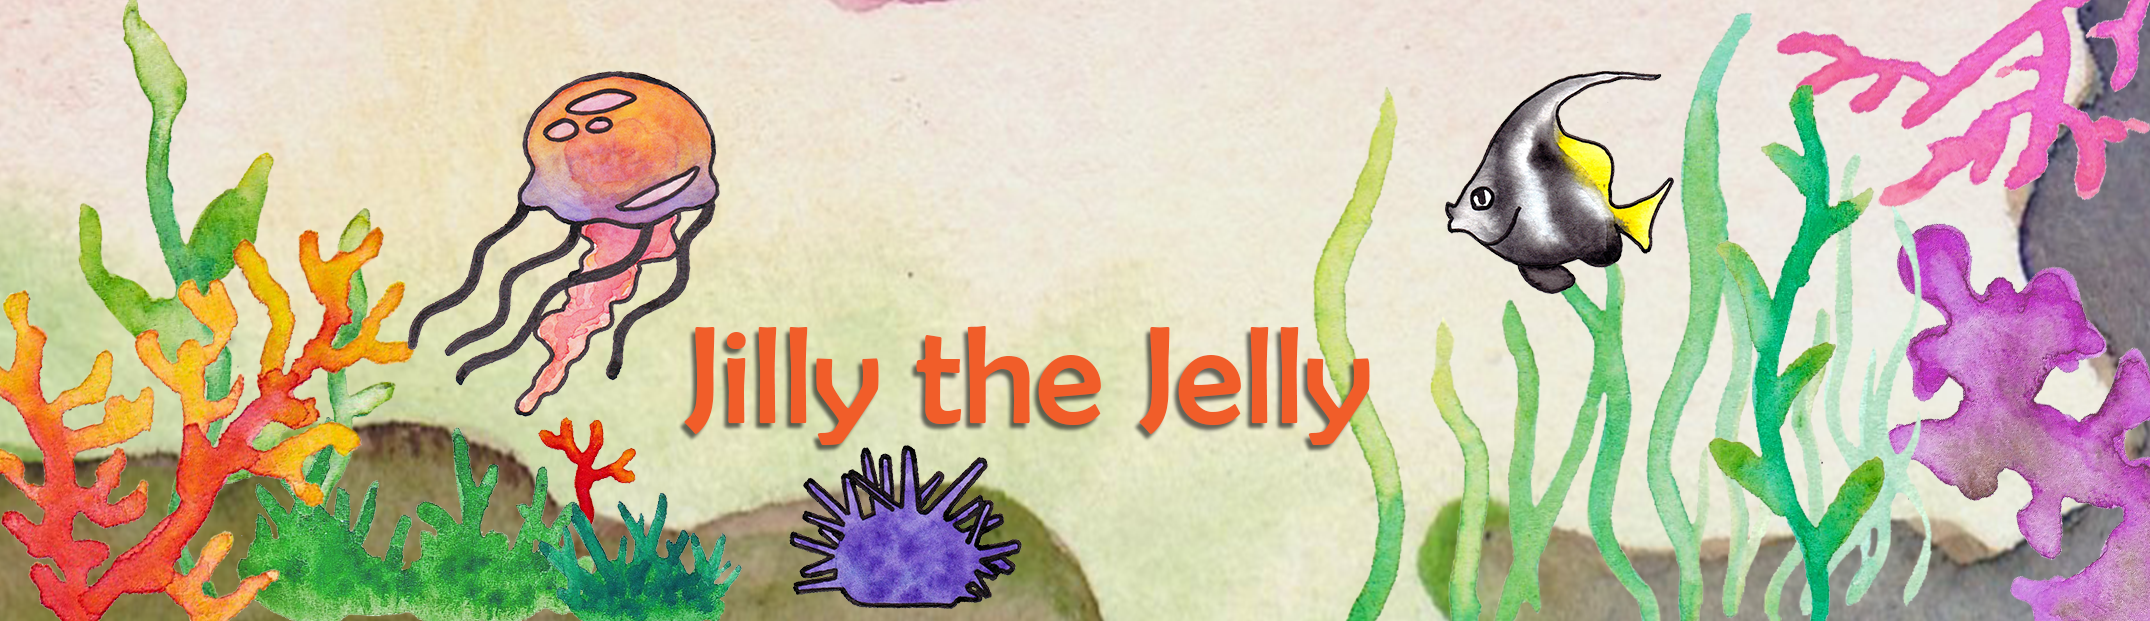 Jilly the Jelly